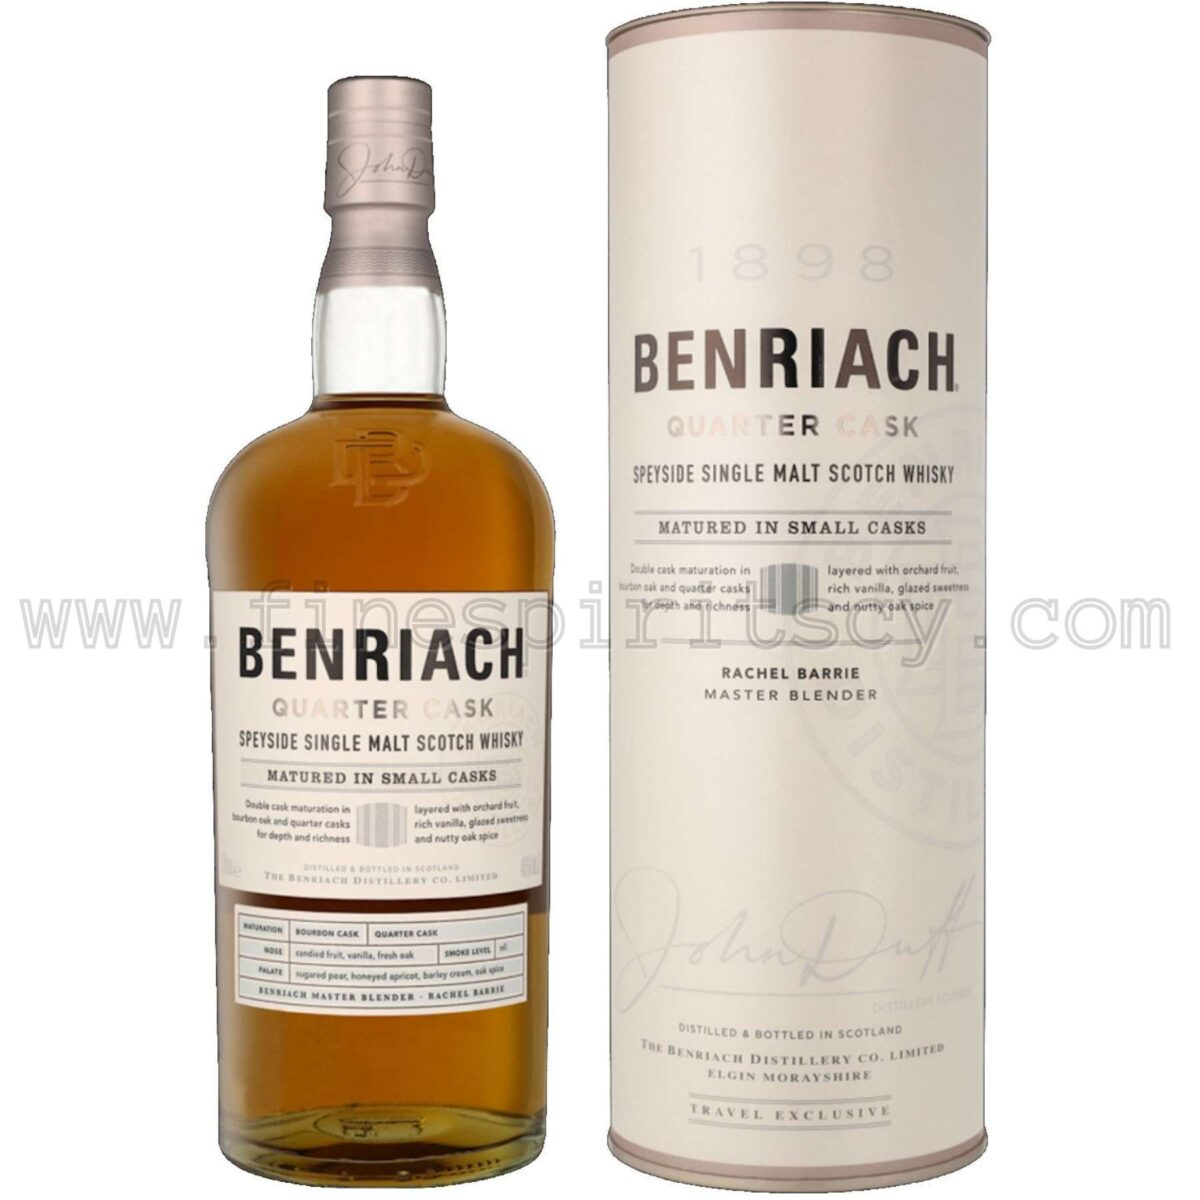 Benriach Quarter Cask litre liter 1000ml 100cl 1L Price Whisky Whiskey Cyprus Online